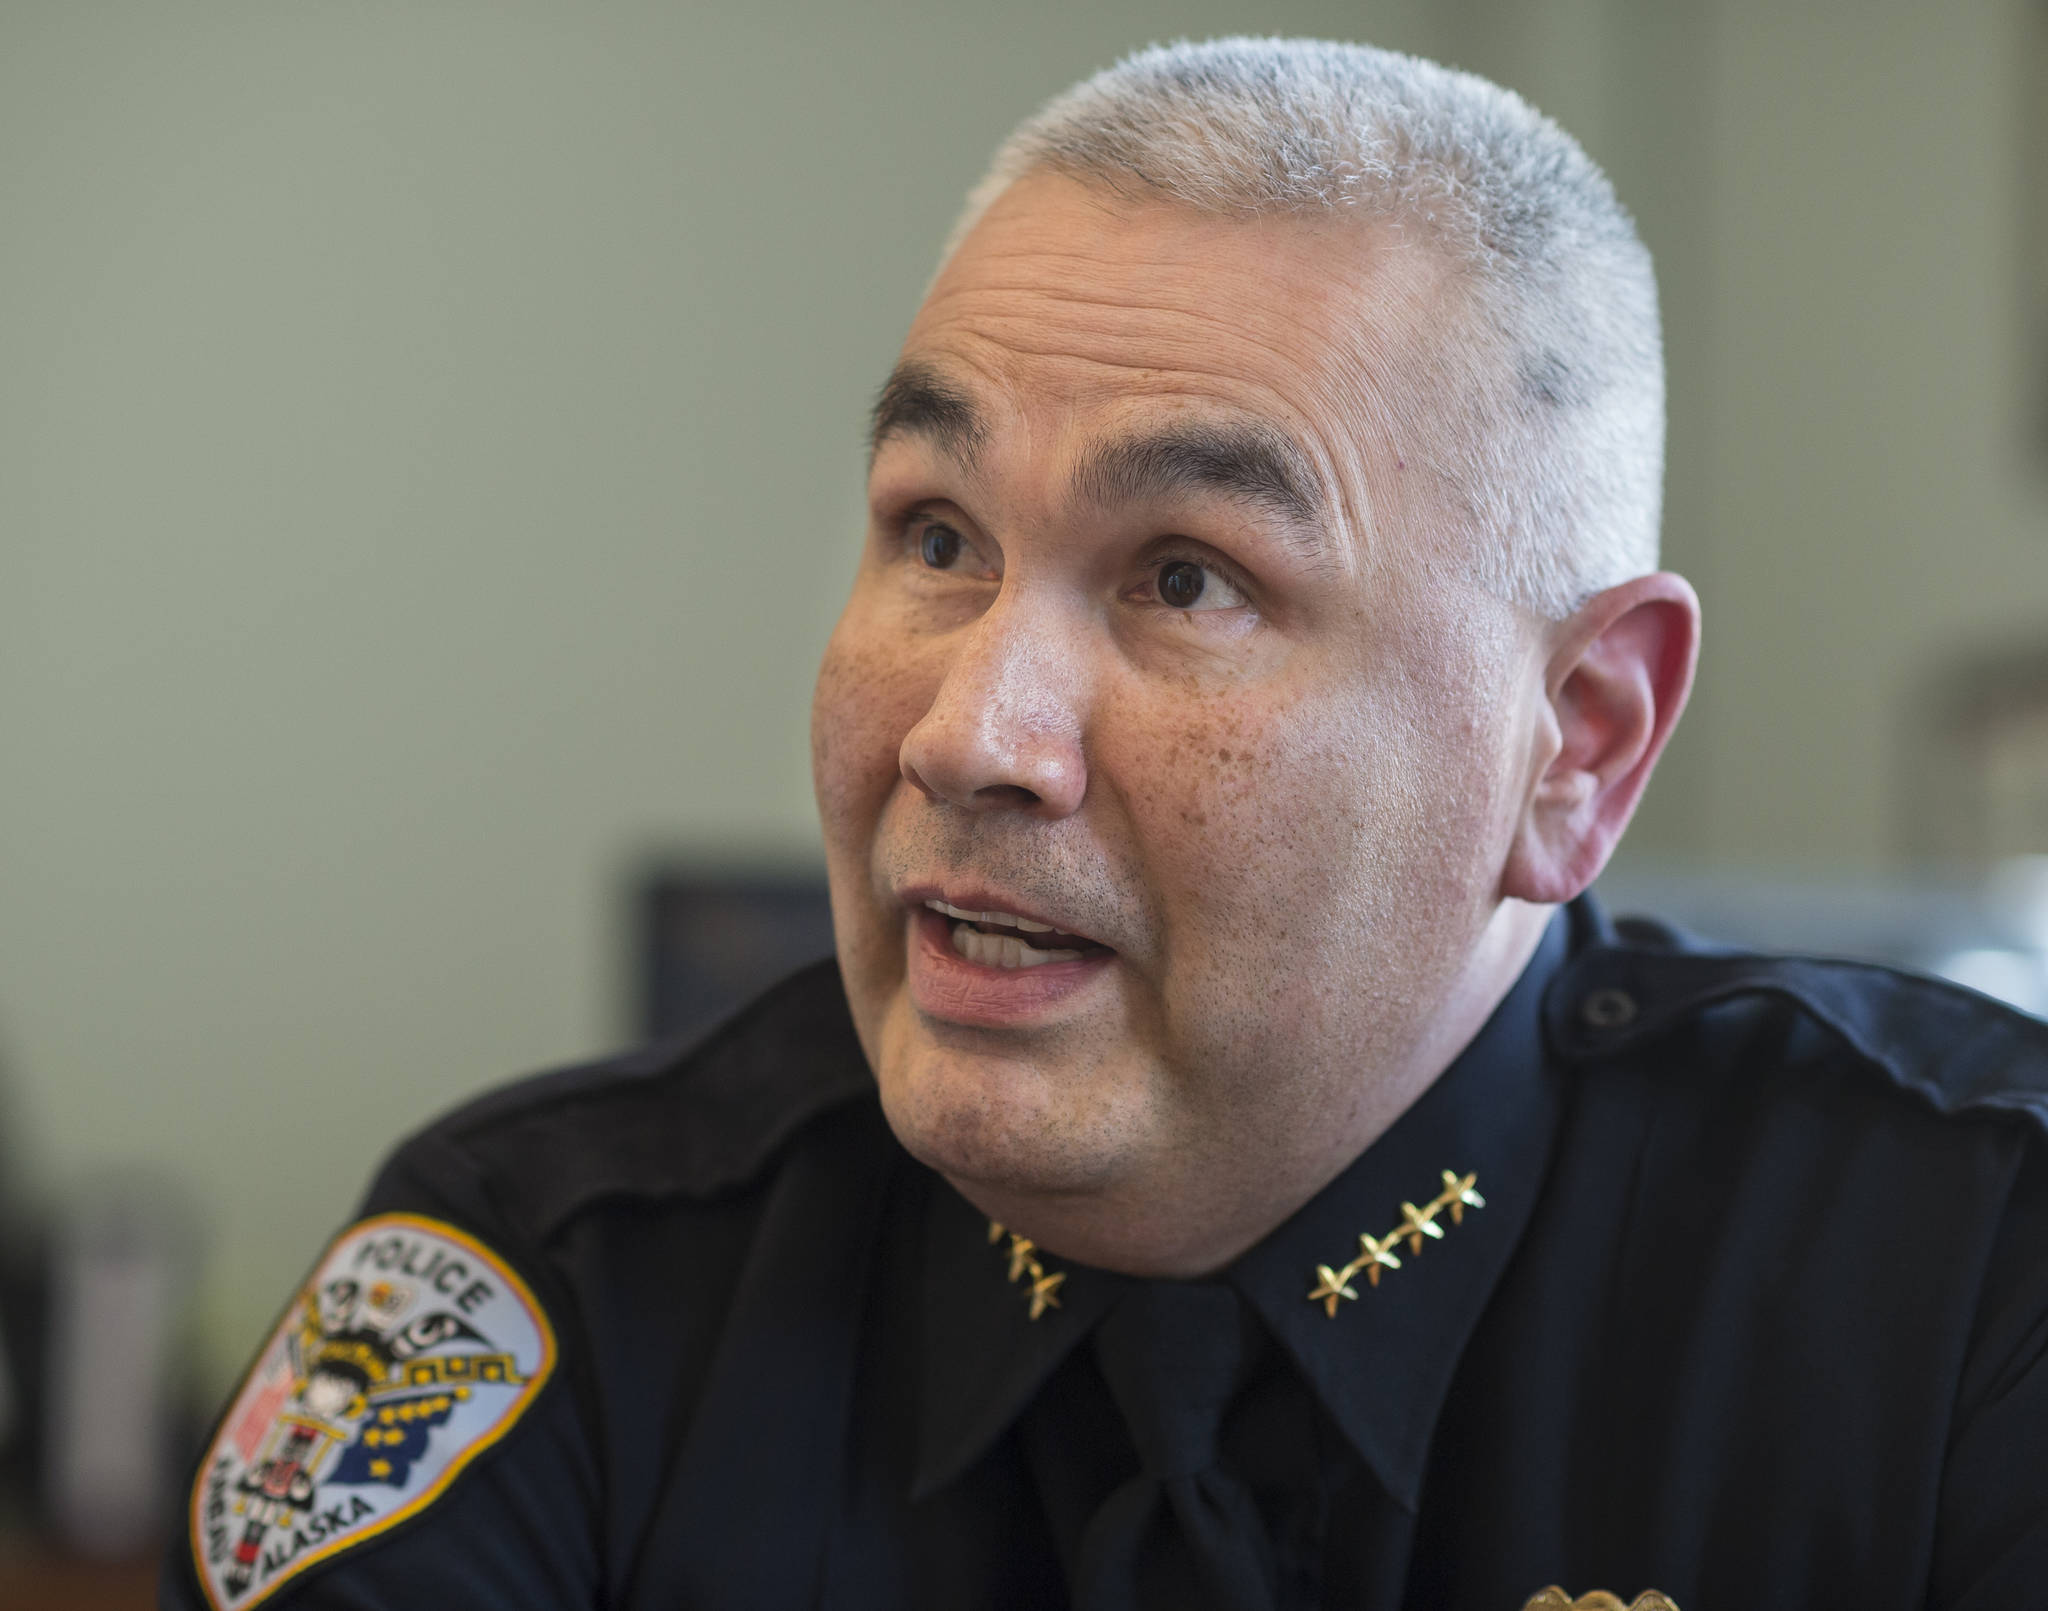 Juneau Police Department Police Chief Ed Mercer speaks about his job at the Juneau Police Station on Wednesday, April 4, 2018. (Michael Penn | Juneau Empire)